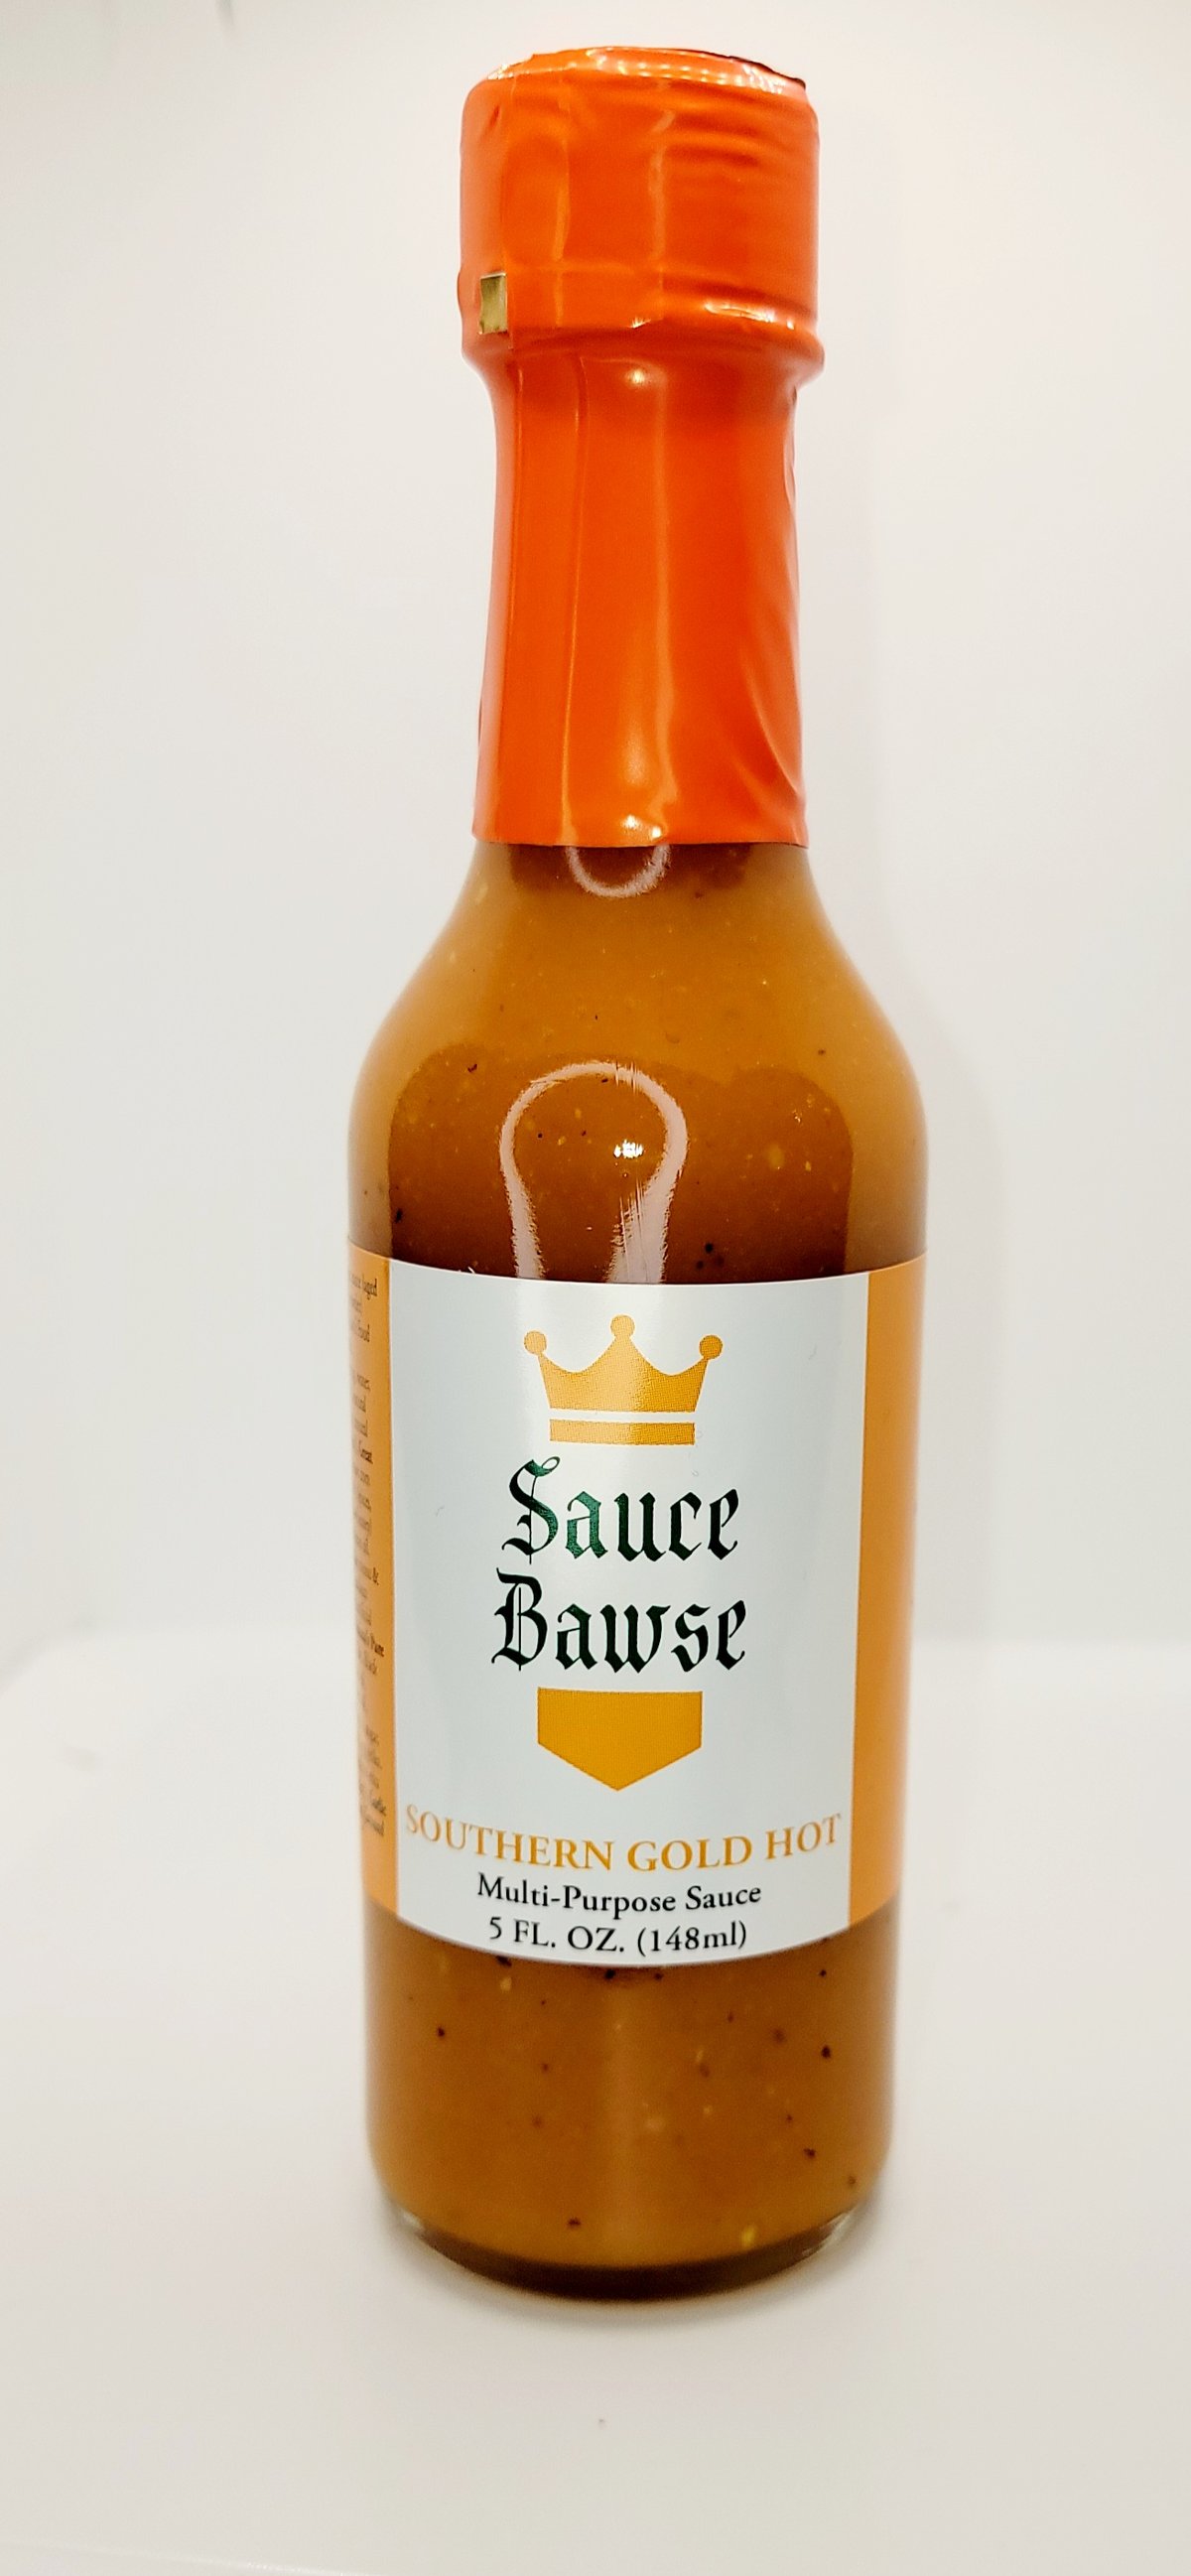 Southern Gold Hot